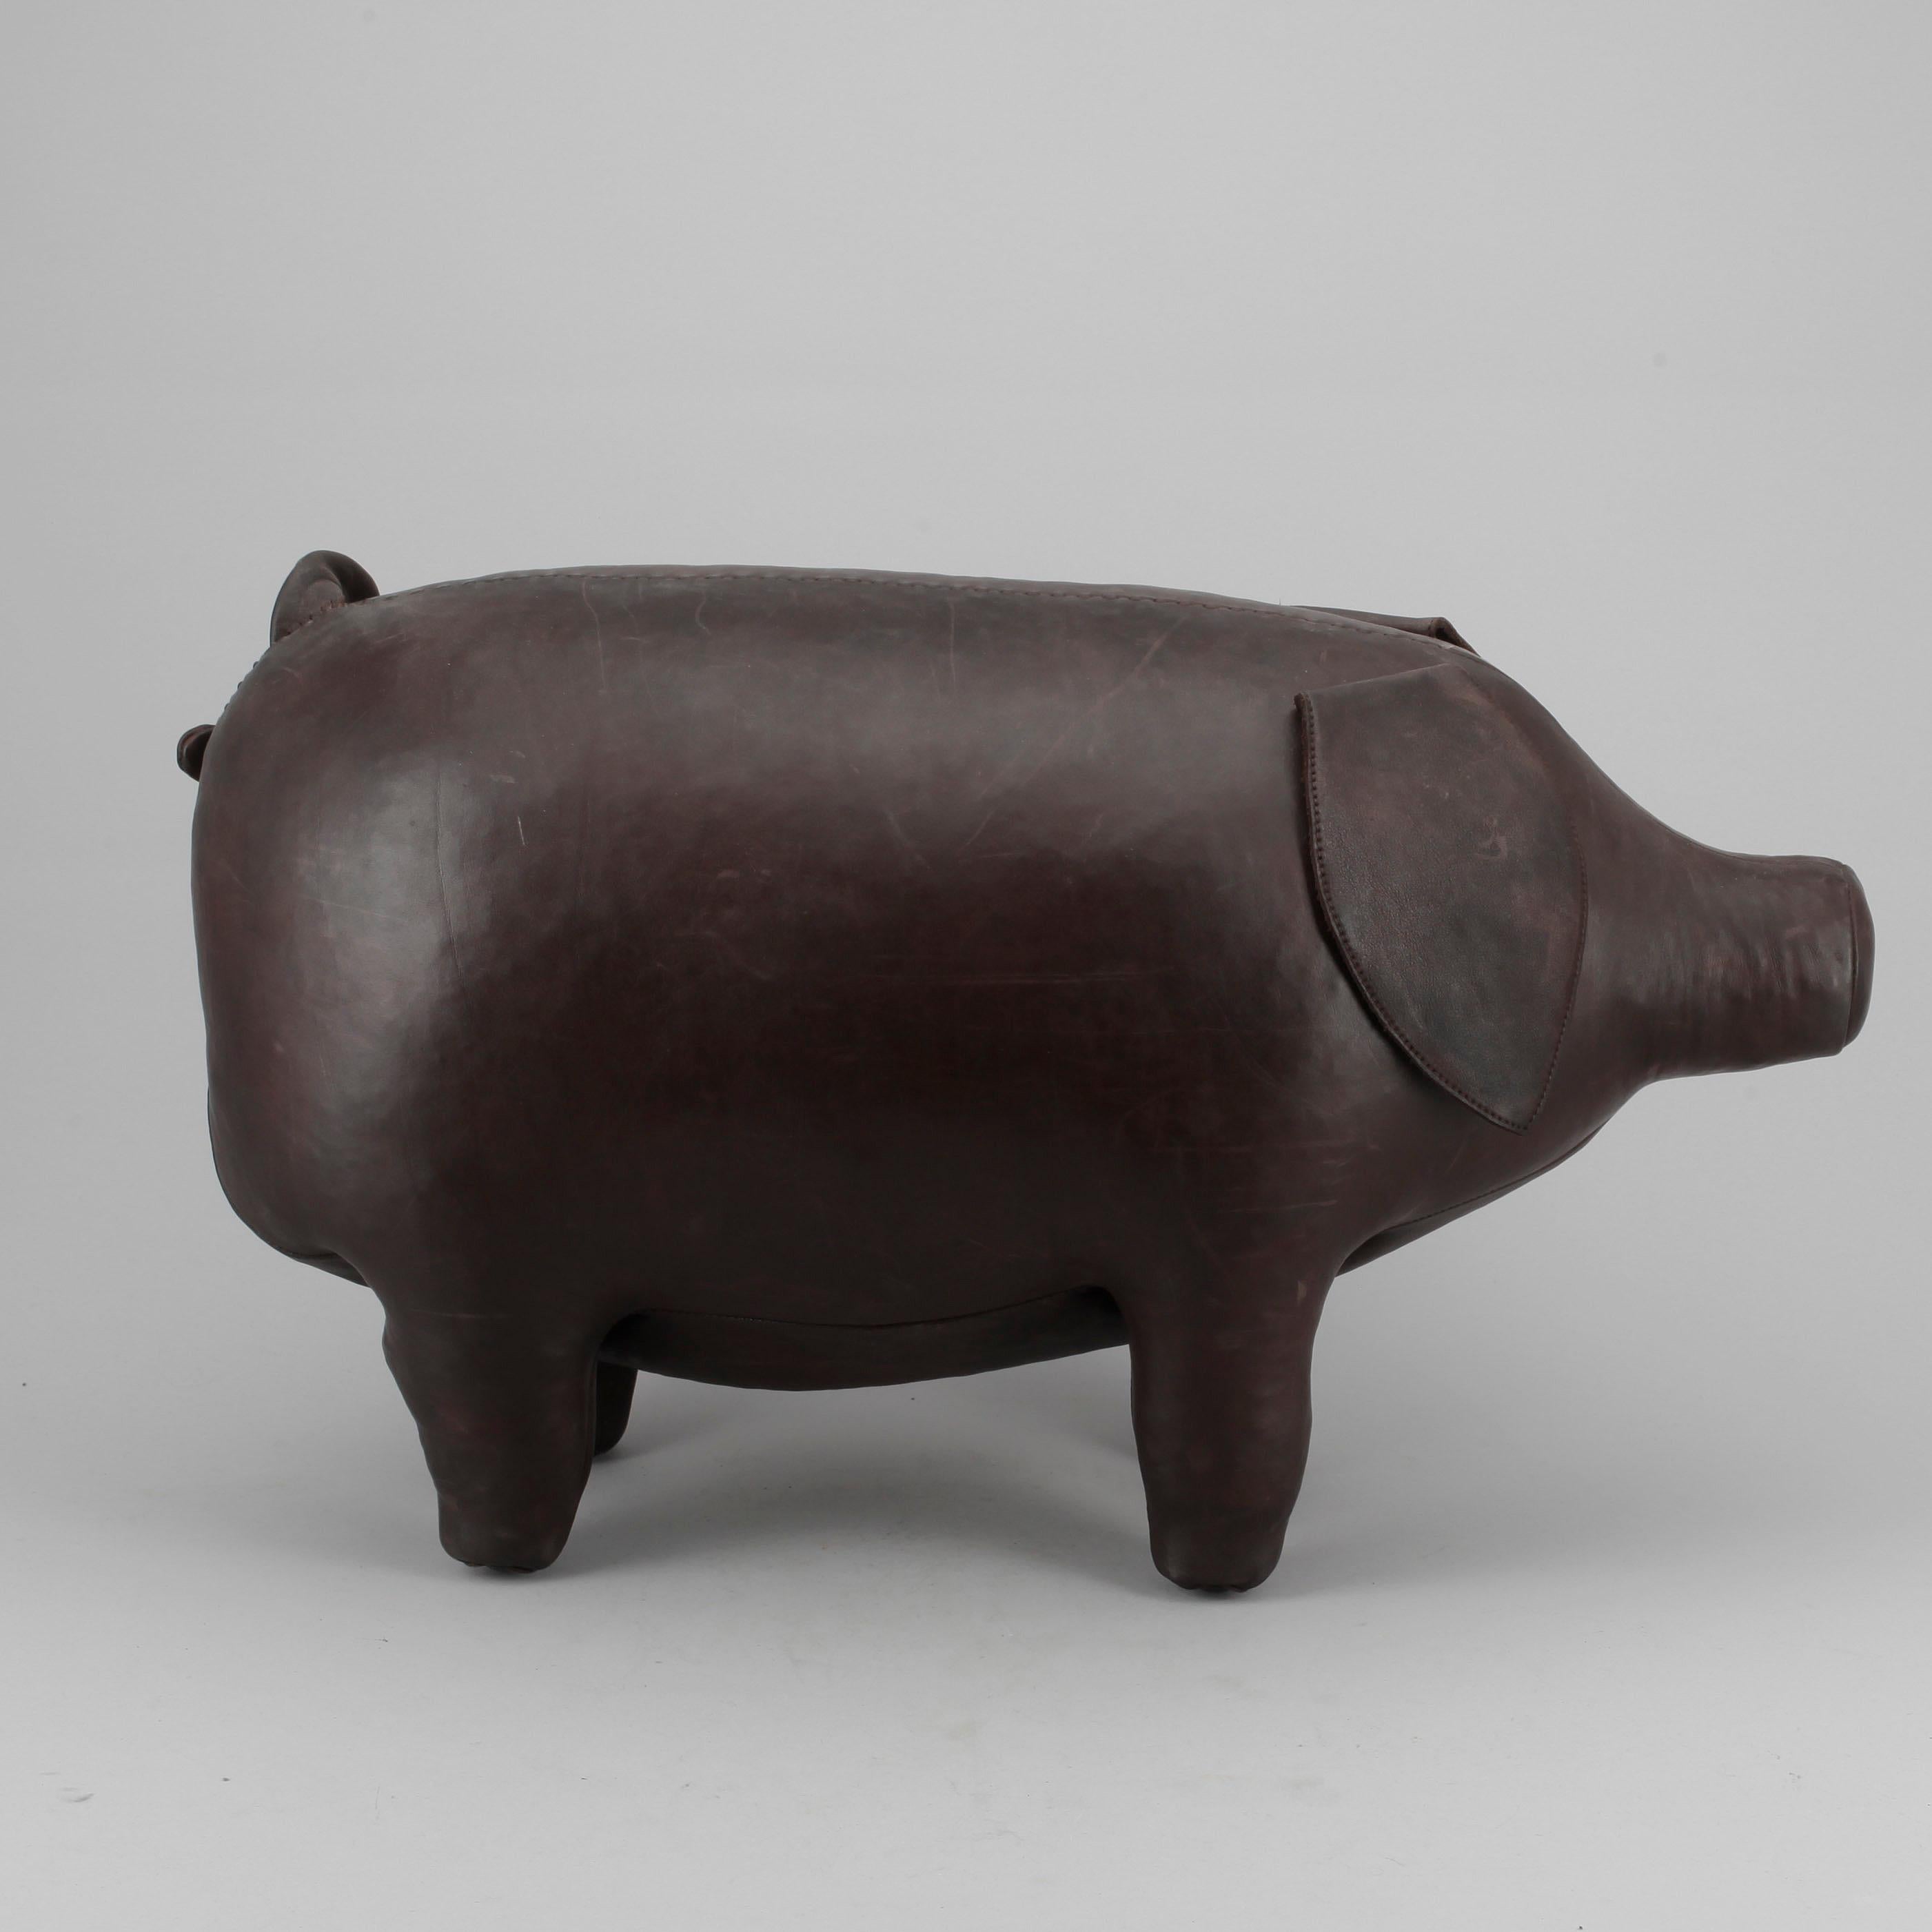 English Dimitri Omersa & Co Pig in Leather for Abercrombie, England, 1980 For Sale